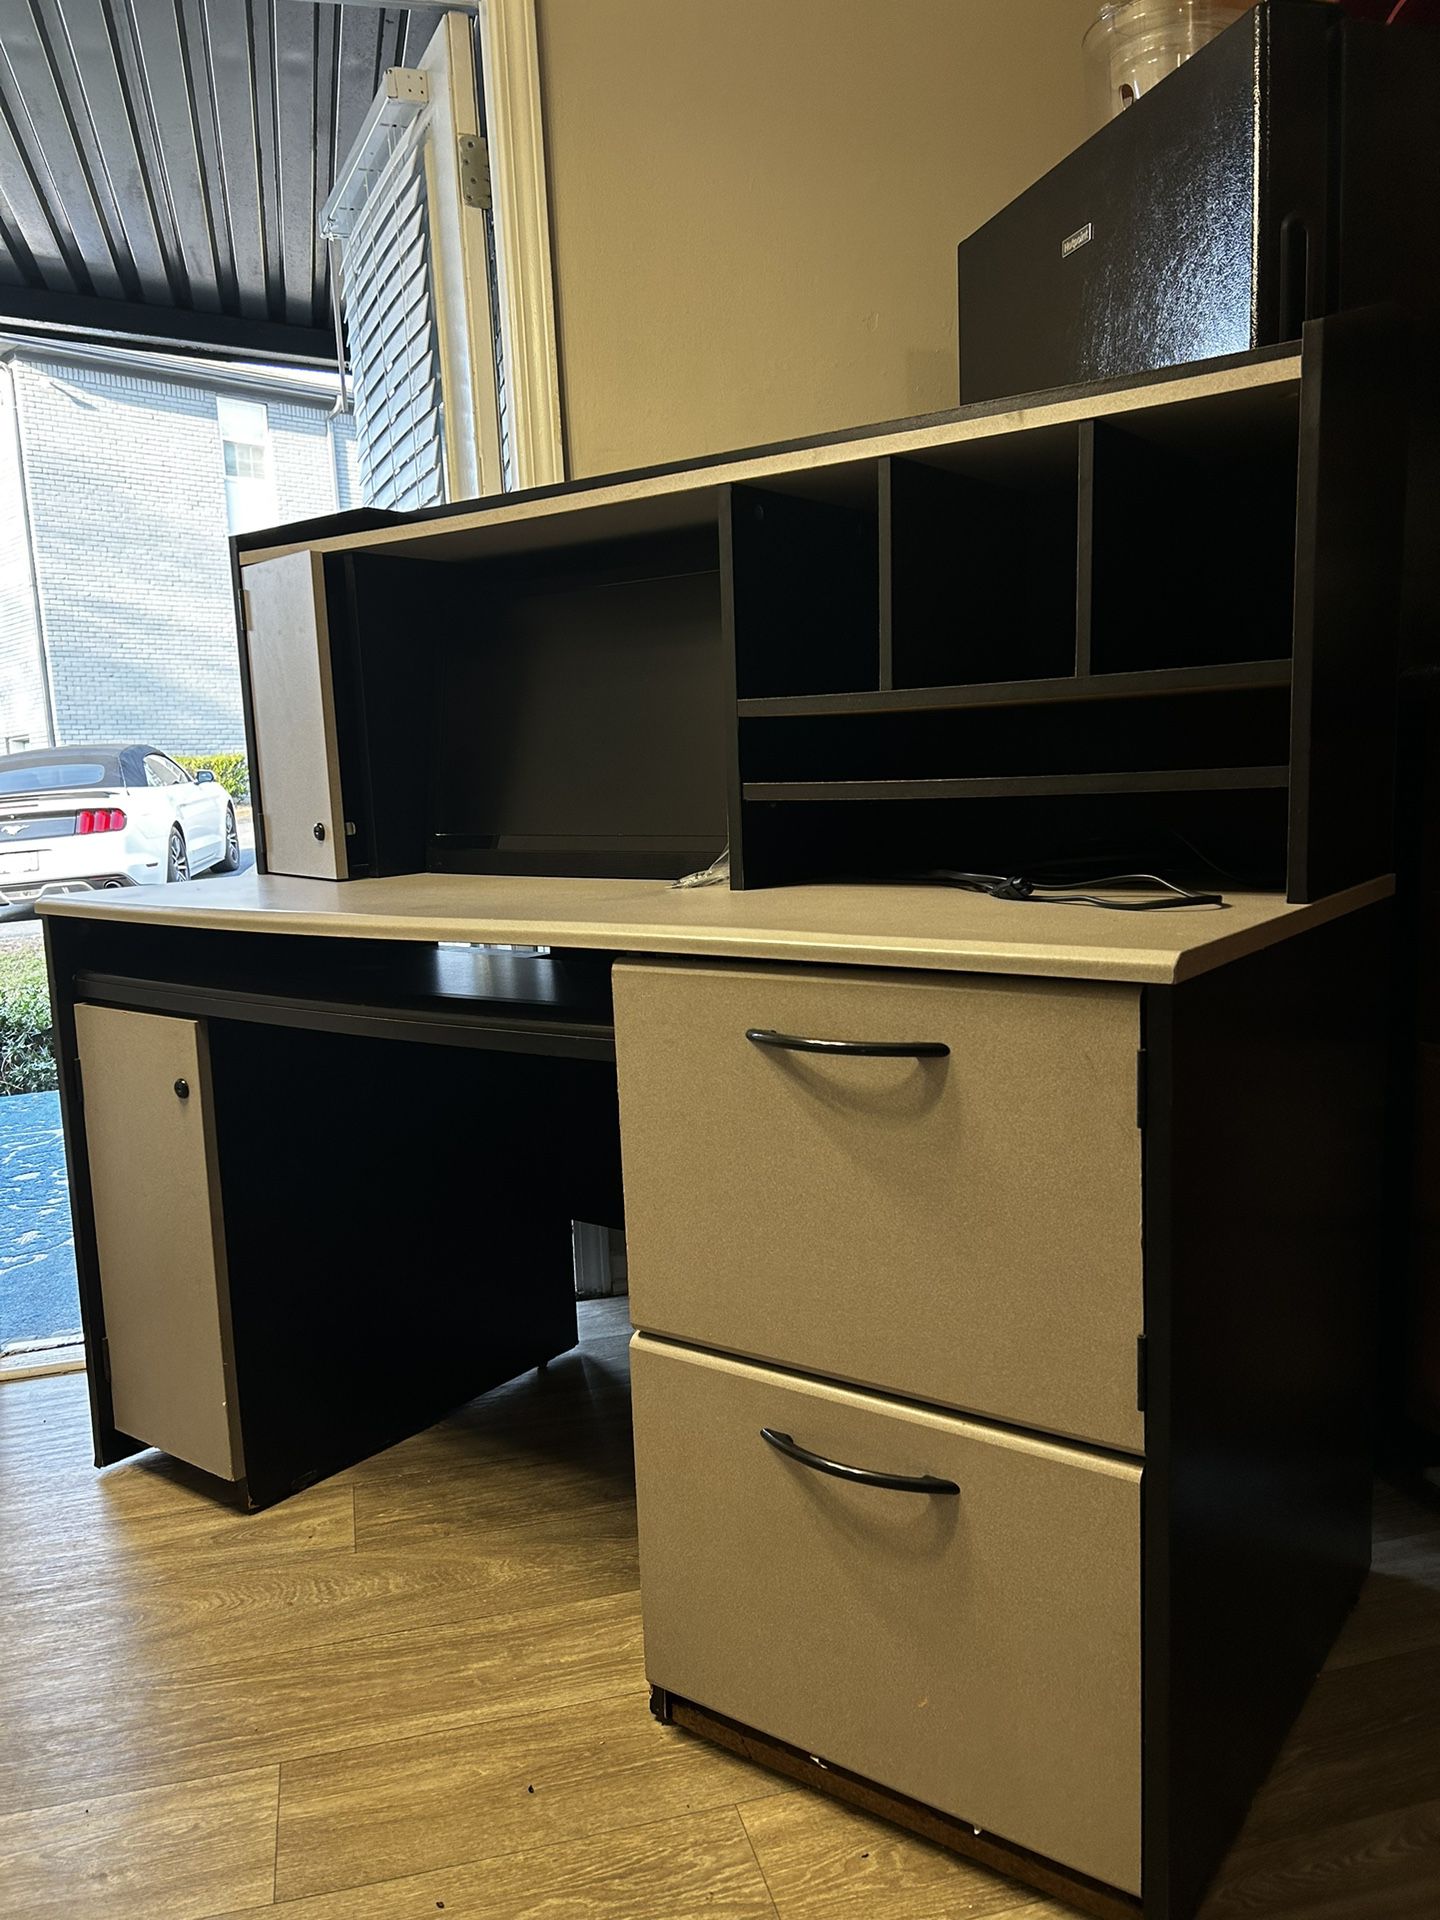 Desk with locking cabinets (key included) filing cabinets, built in visio monitor and keyboard tray